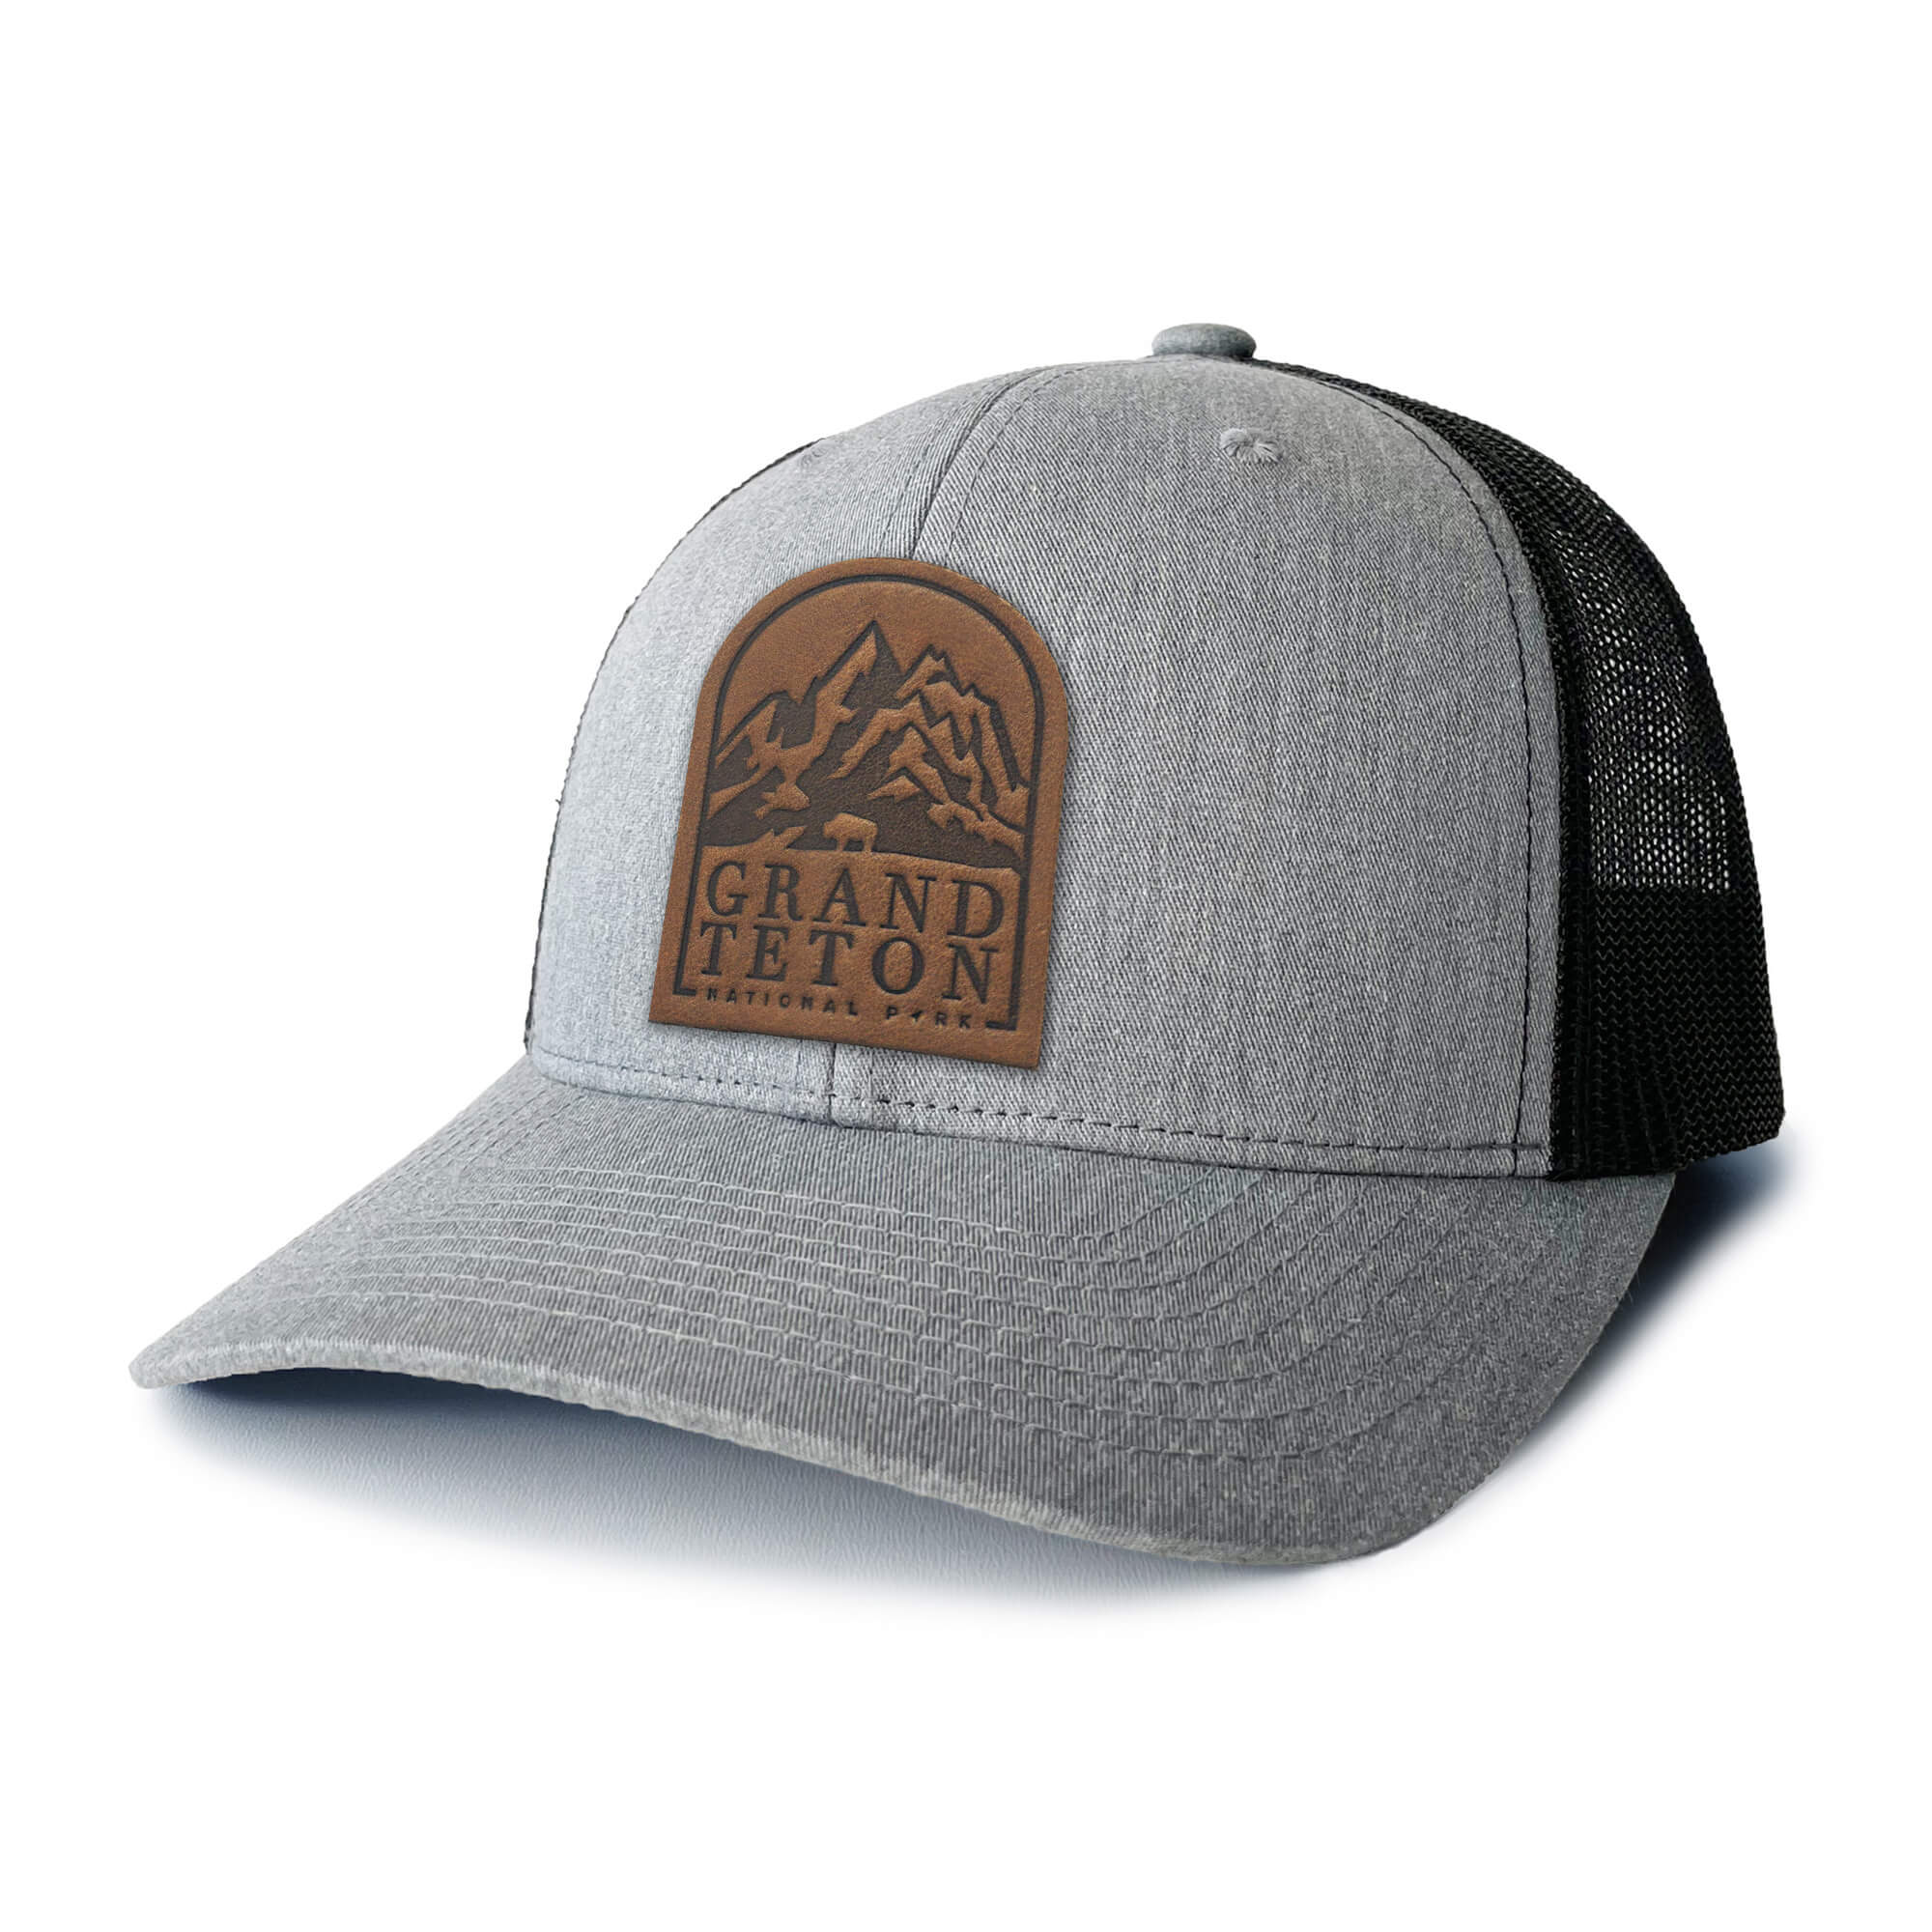 Heather grey and white trucker hat with full-grain leather patch of Grand Teton National Park | BLACK-007-003, CHARC-007-003, NAVY-007-003, HGREY-007-003, MOSS-007-003, BROWN-007-003